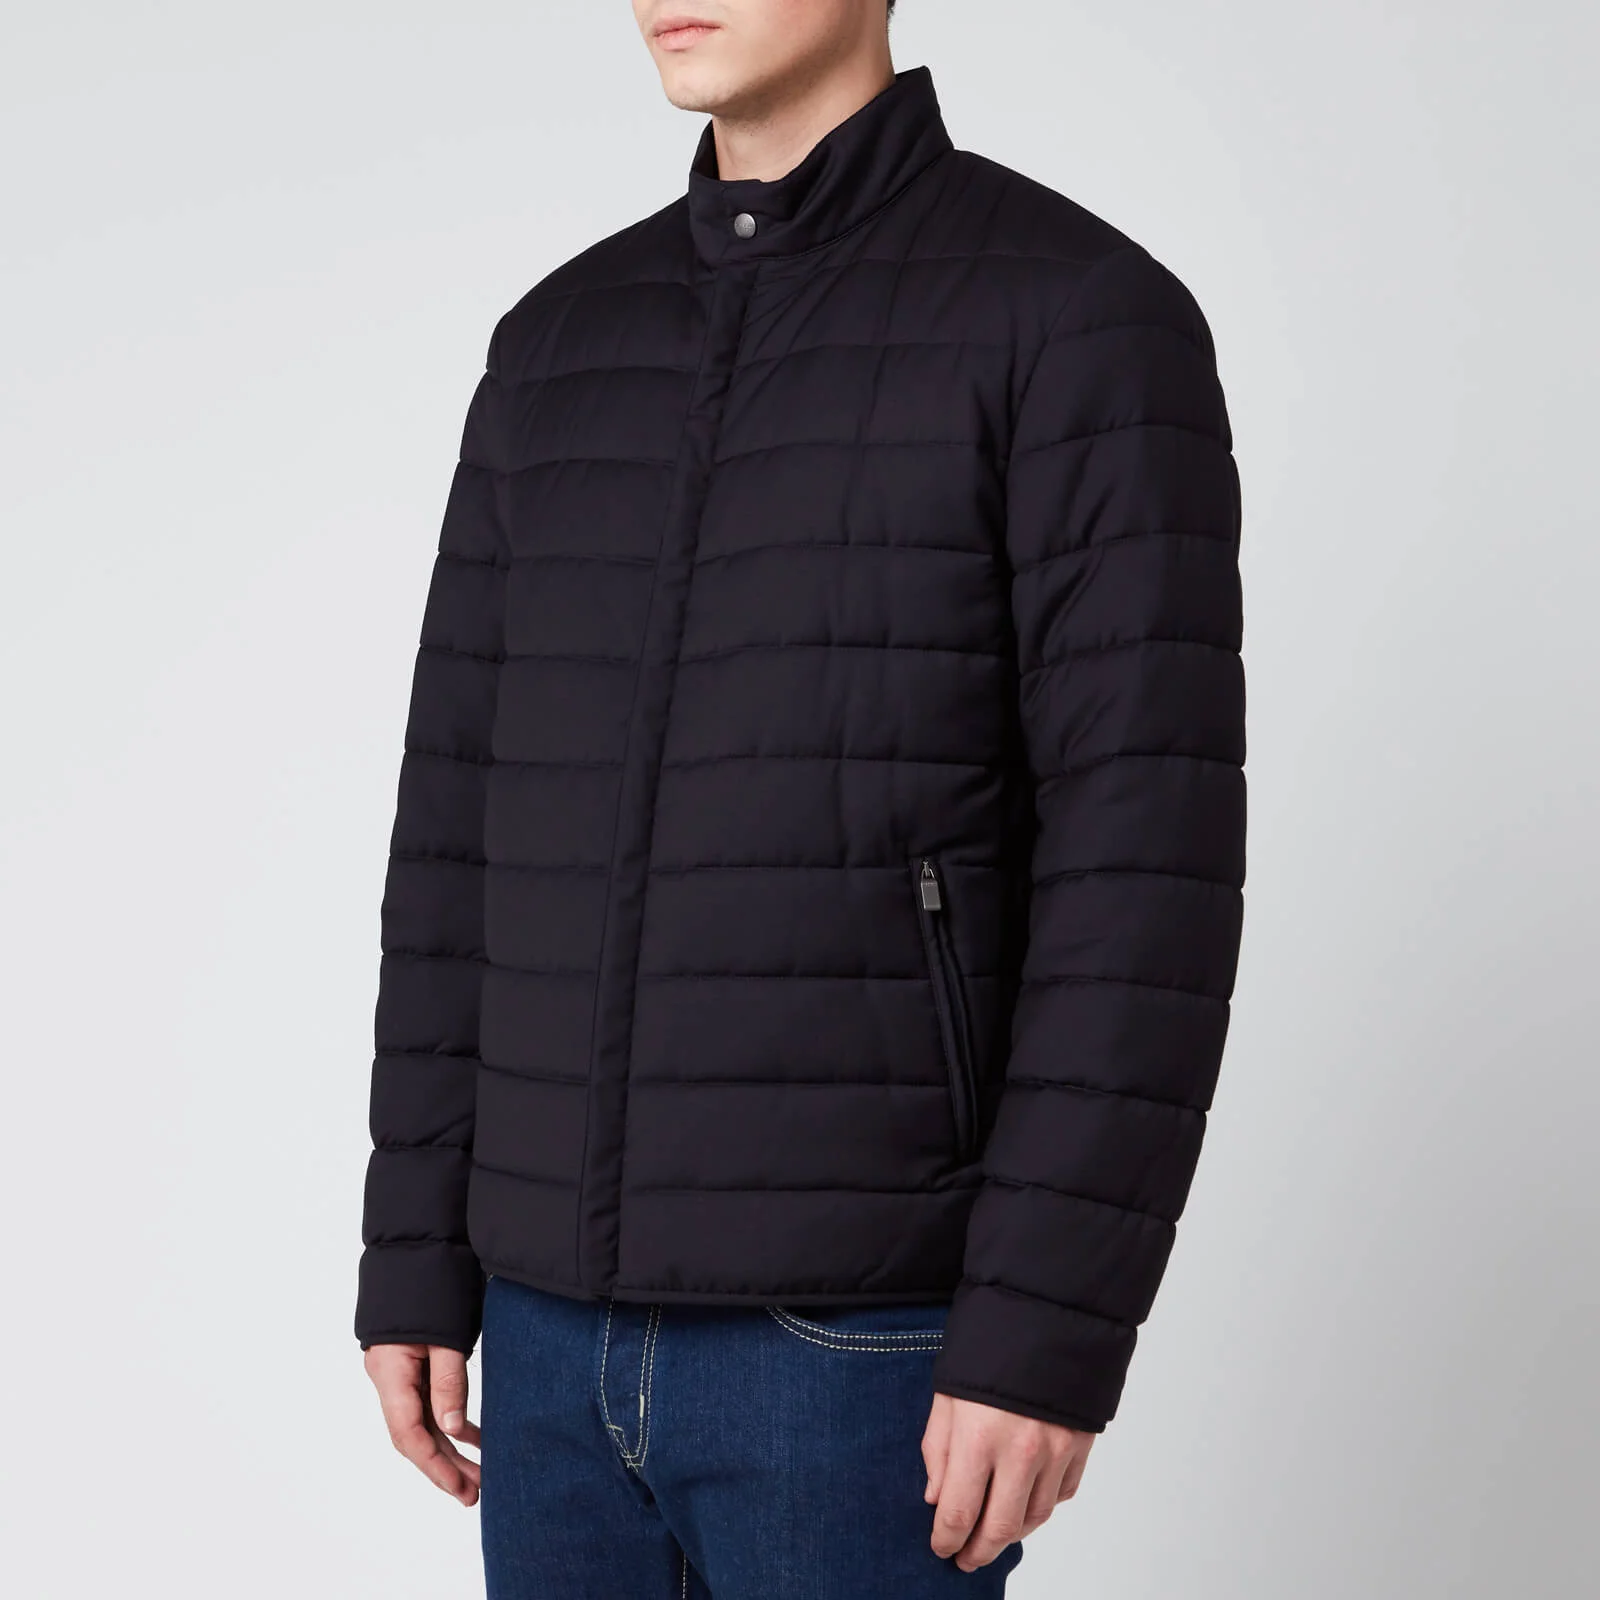 Canali Men's Quilted Storm System Blouson Jacket - Navy Image 1